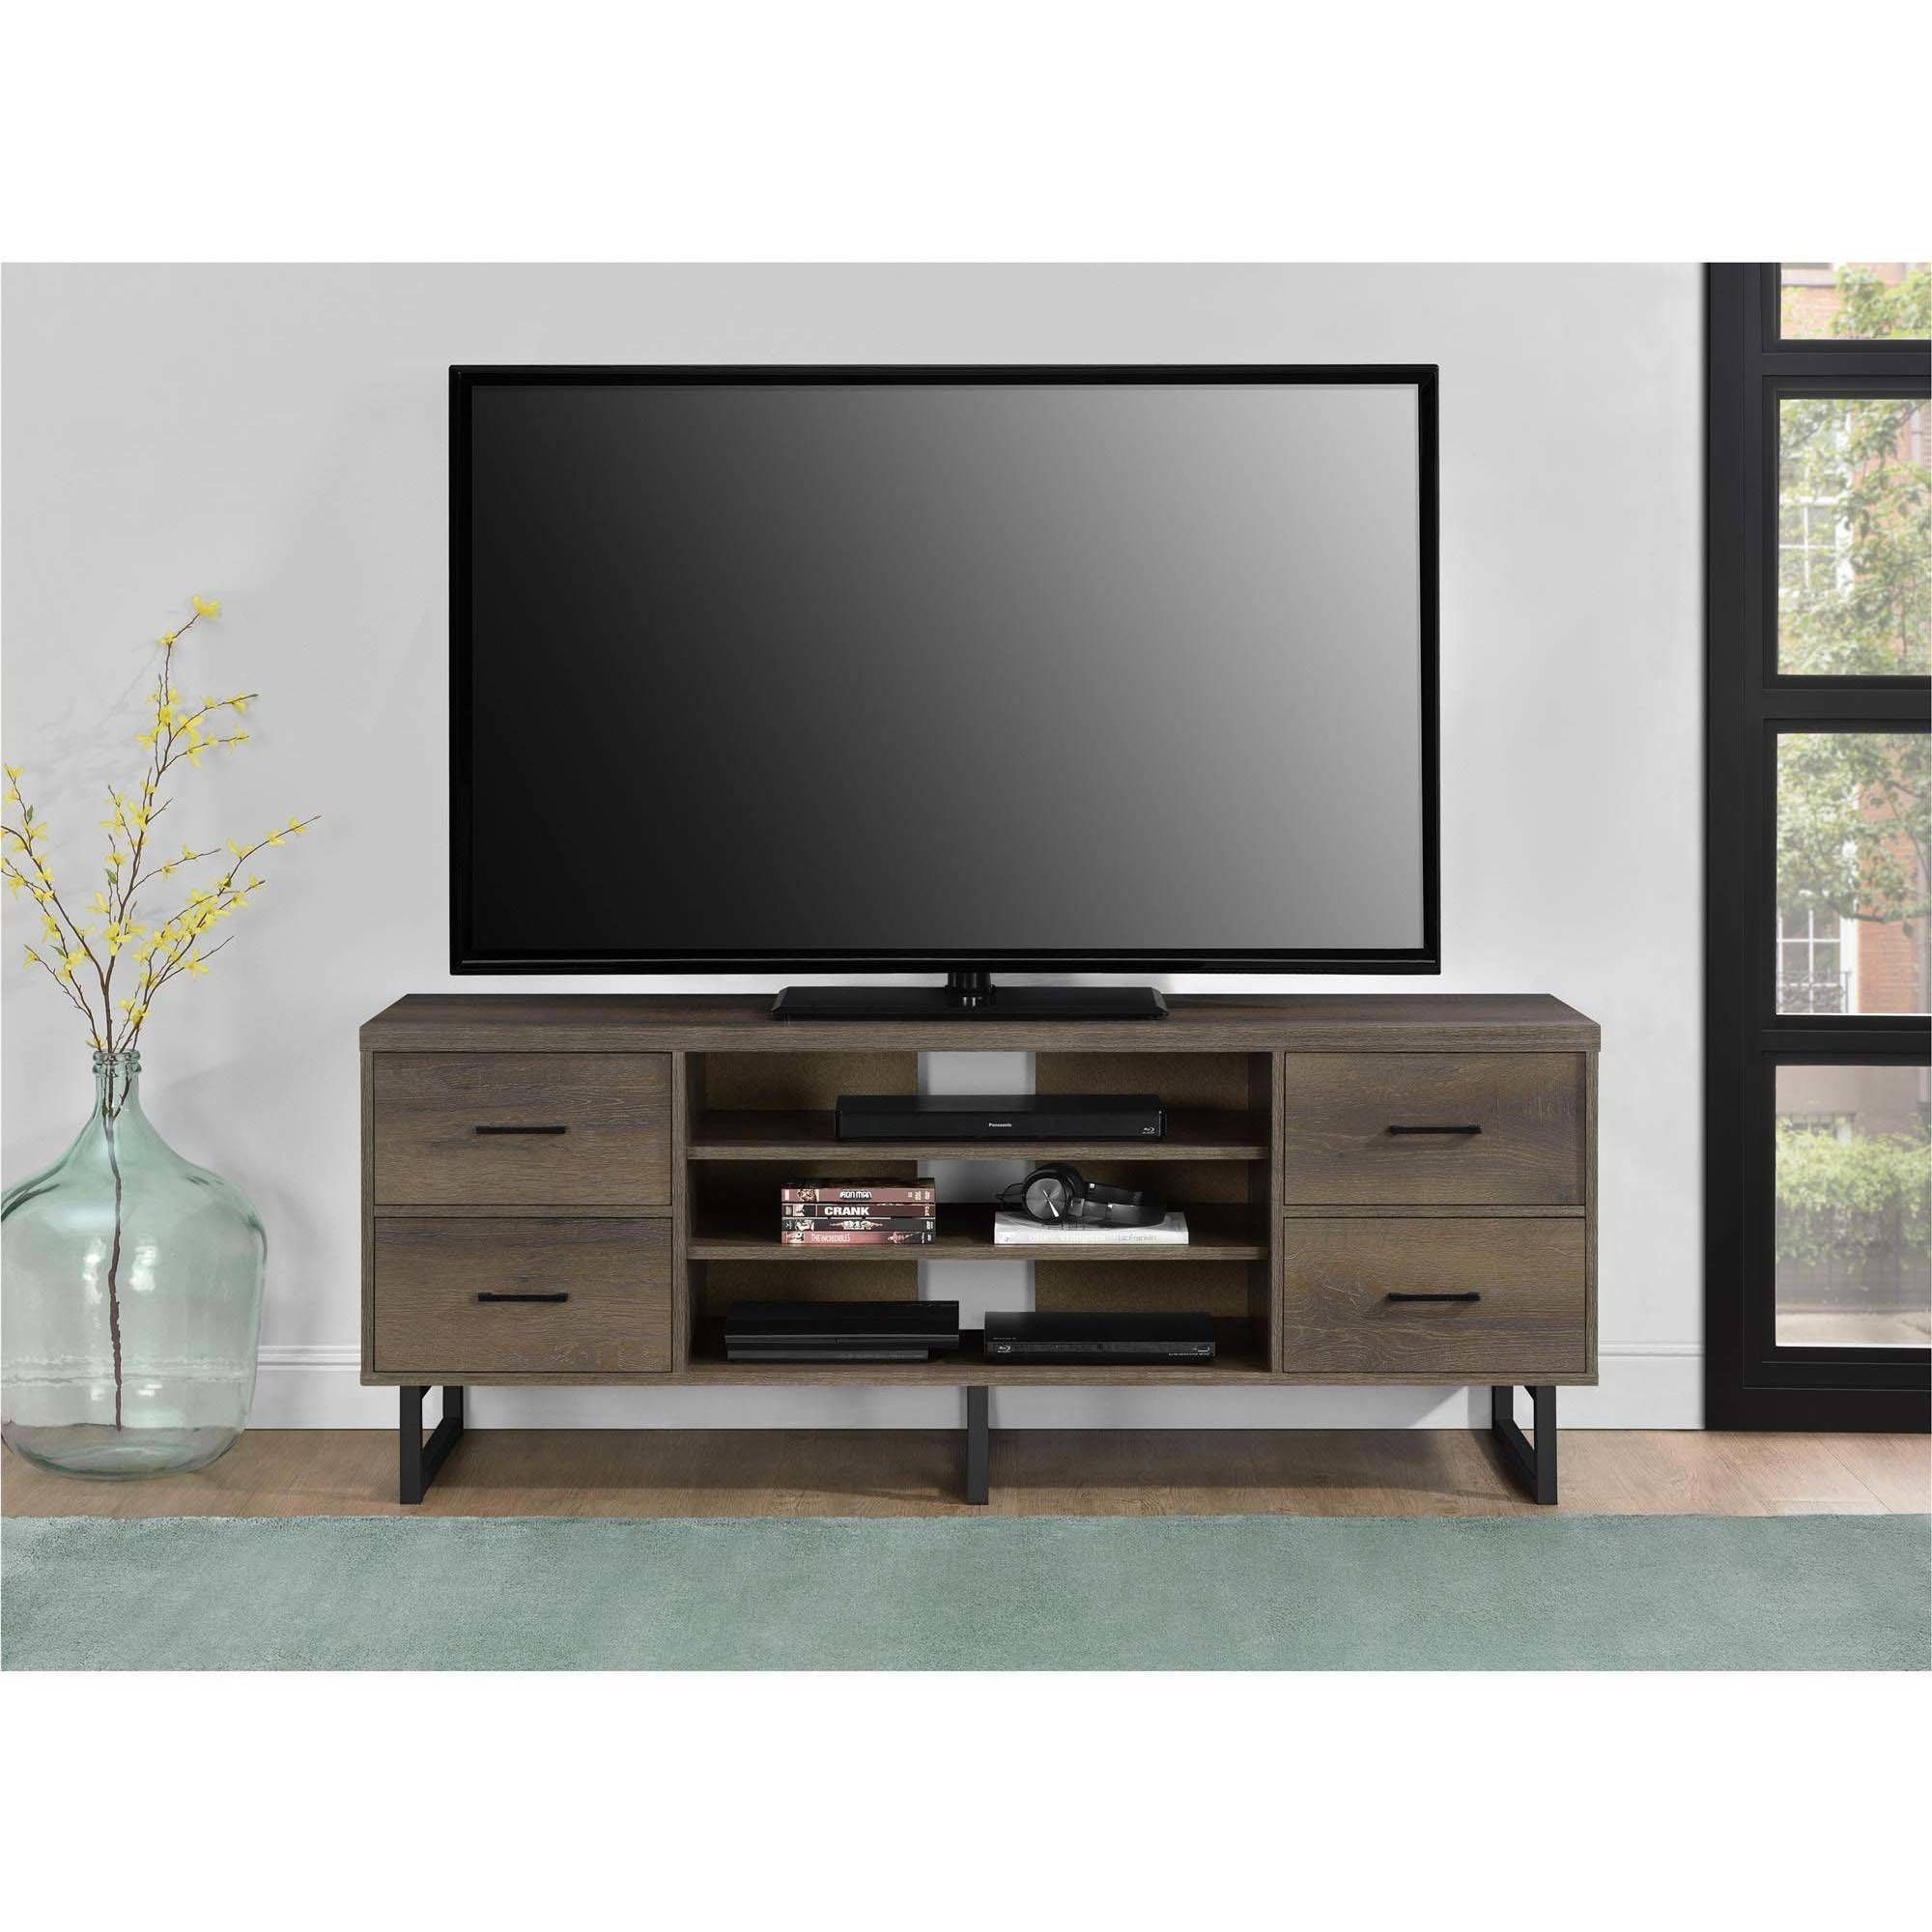 Ameriwood Home Candon Tv Stand With Bins For Tvs Up To 60 For Jackson Wide Tv Stands (View 2 of 15)